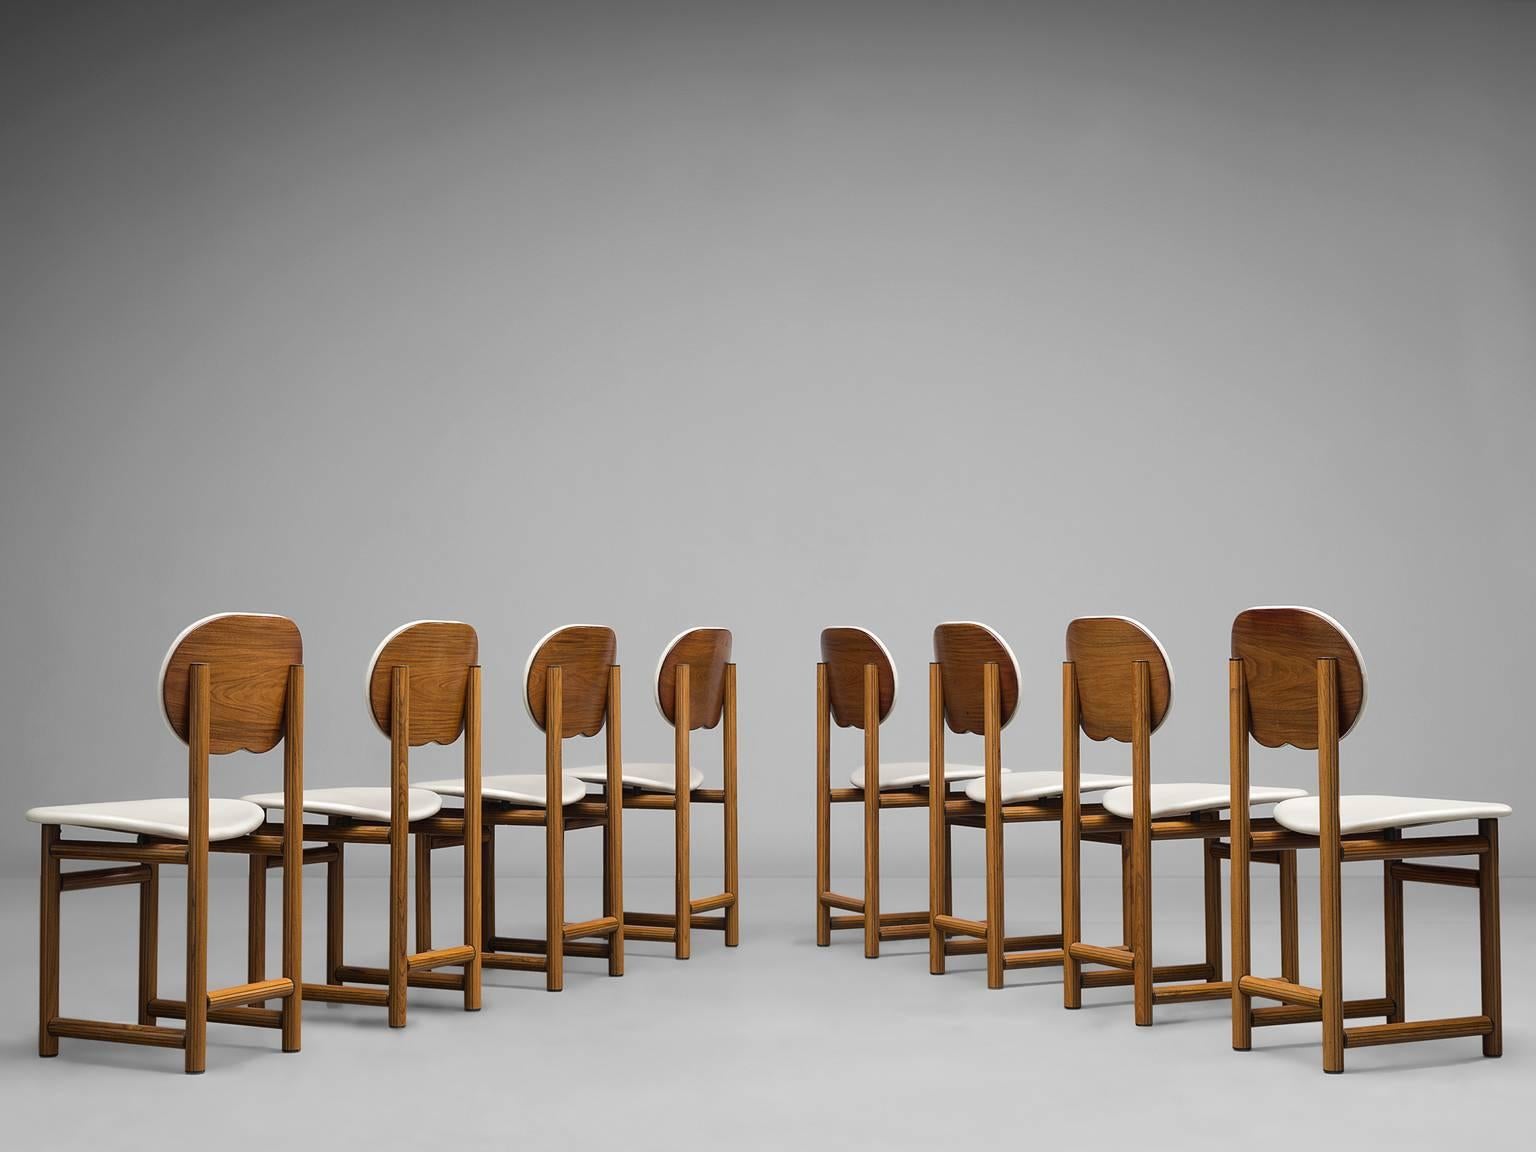 Eight dining chairs model 8104 by Afra and Tobia Scarpa for Maxalto, briar burl, lacquered wood, enameled steel, brass, Italy, circa 1975.

This set of chairs that is designed by Afra and Tobia Scarpa is a unique design by the designere couple. The